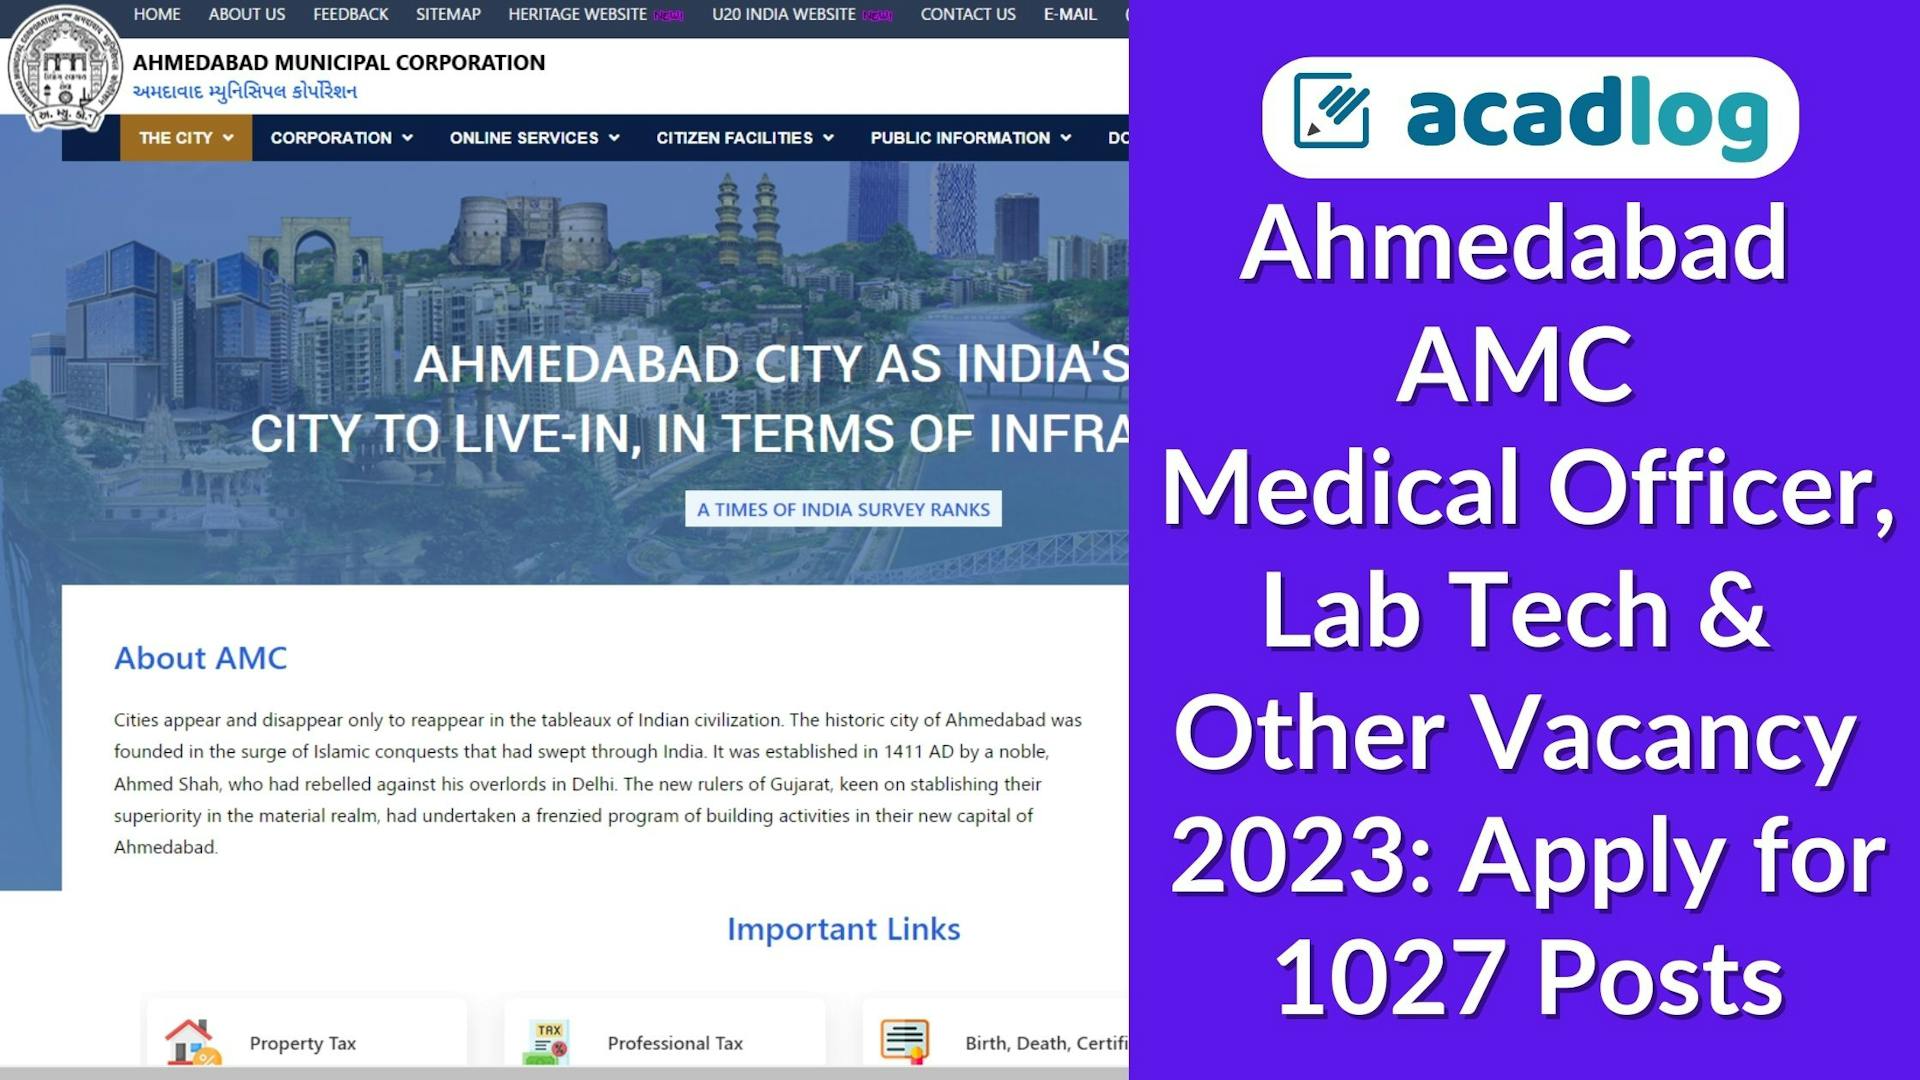 Ahmedabad AMC Medical Officer, Lab Tech & Other Vacancy 2023: Apply for 1027 Posts